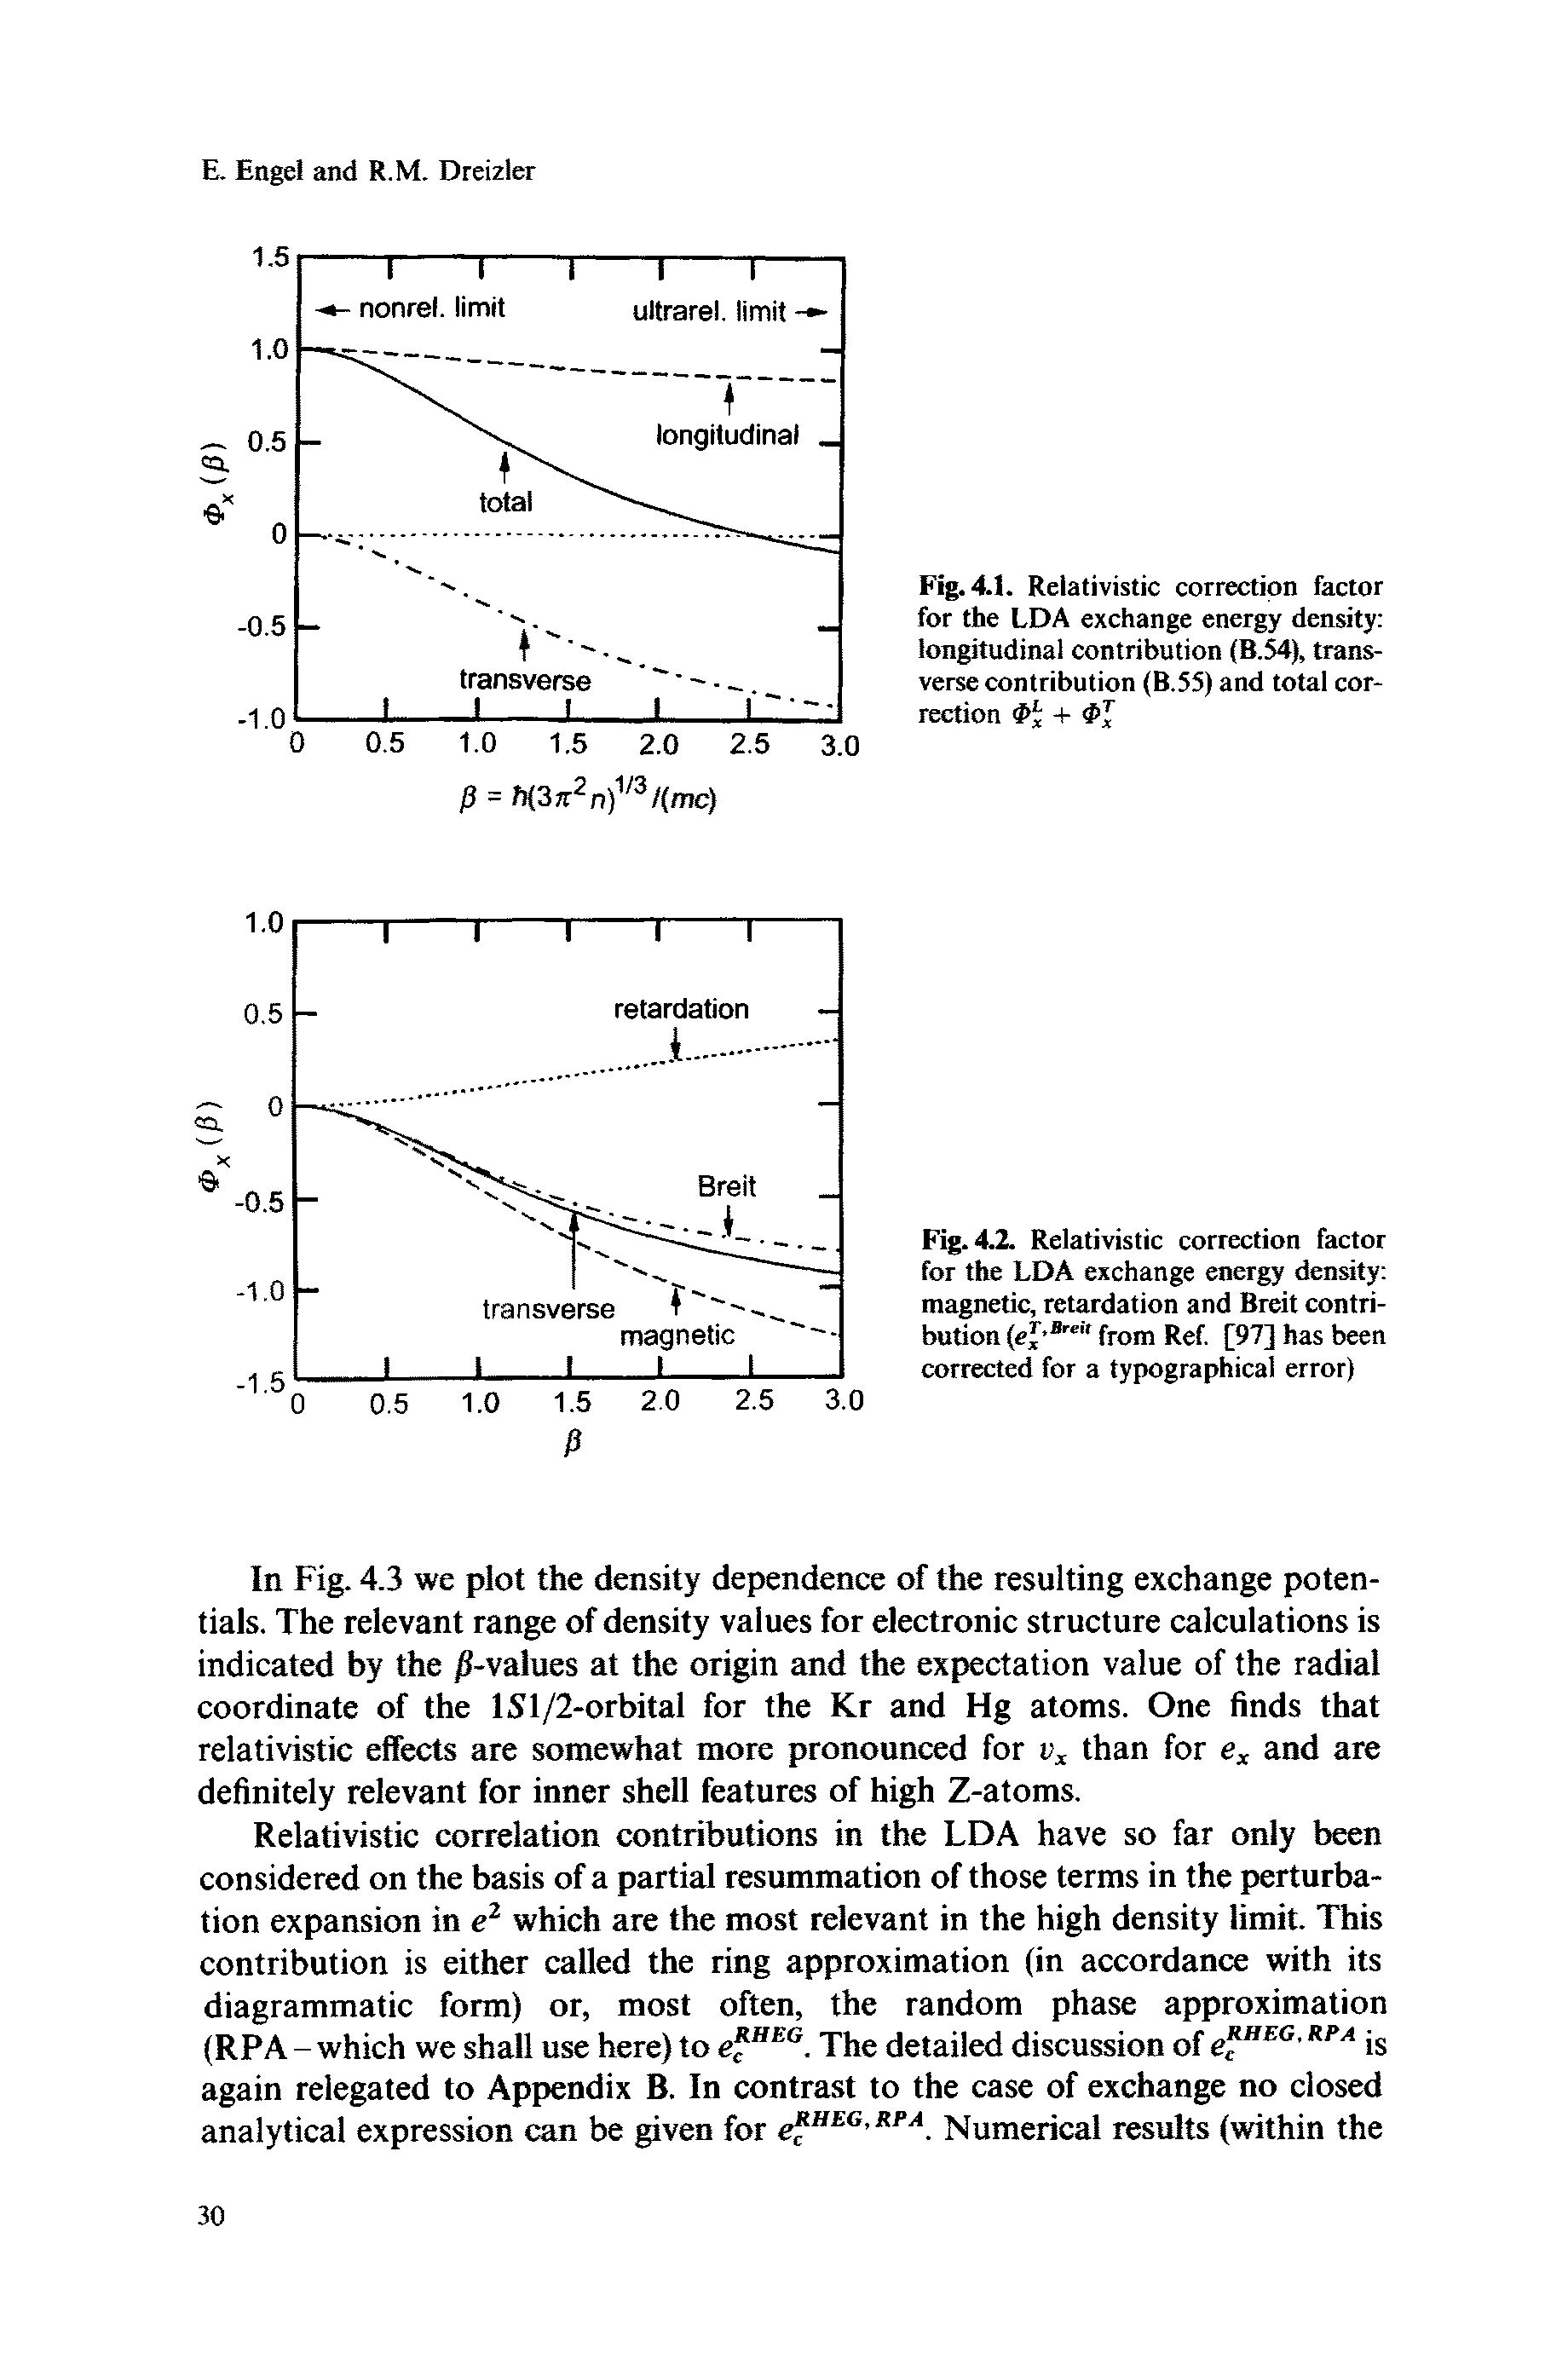 Fig. 4.2. Relativistic correction factor for the LDA exchange energy density magnetic, retardation and Breit contribution (ej " from Ref [97] has been corrected for a typographical error)...